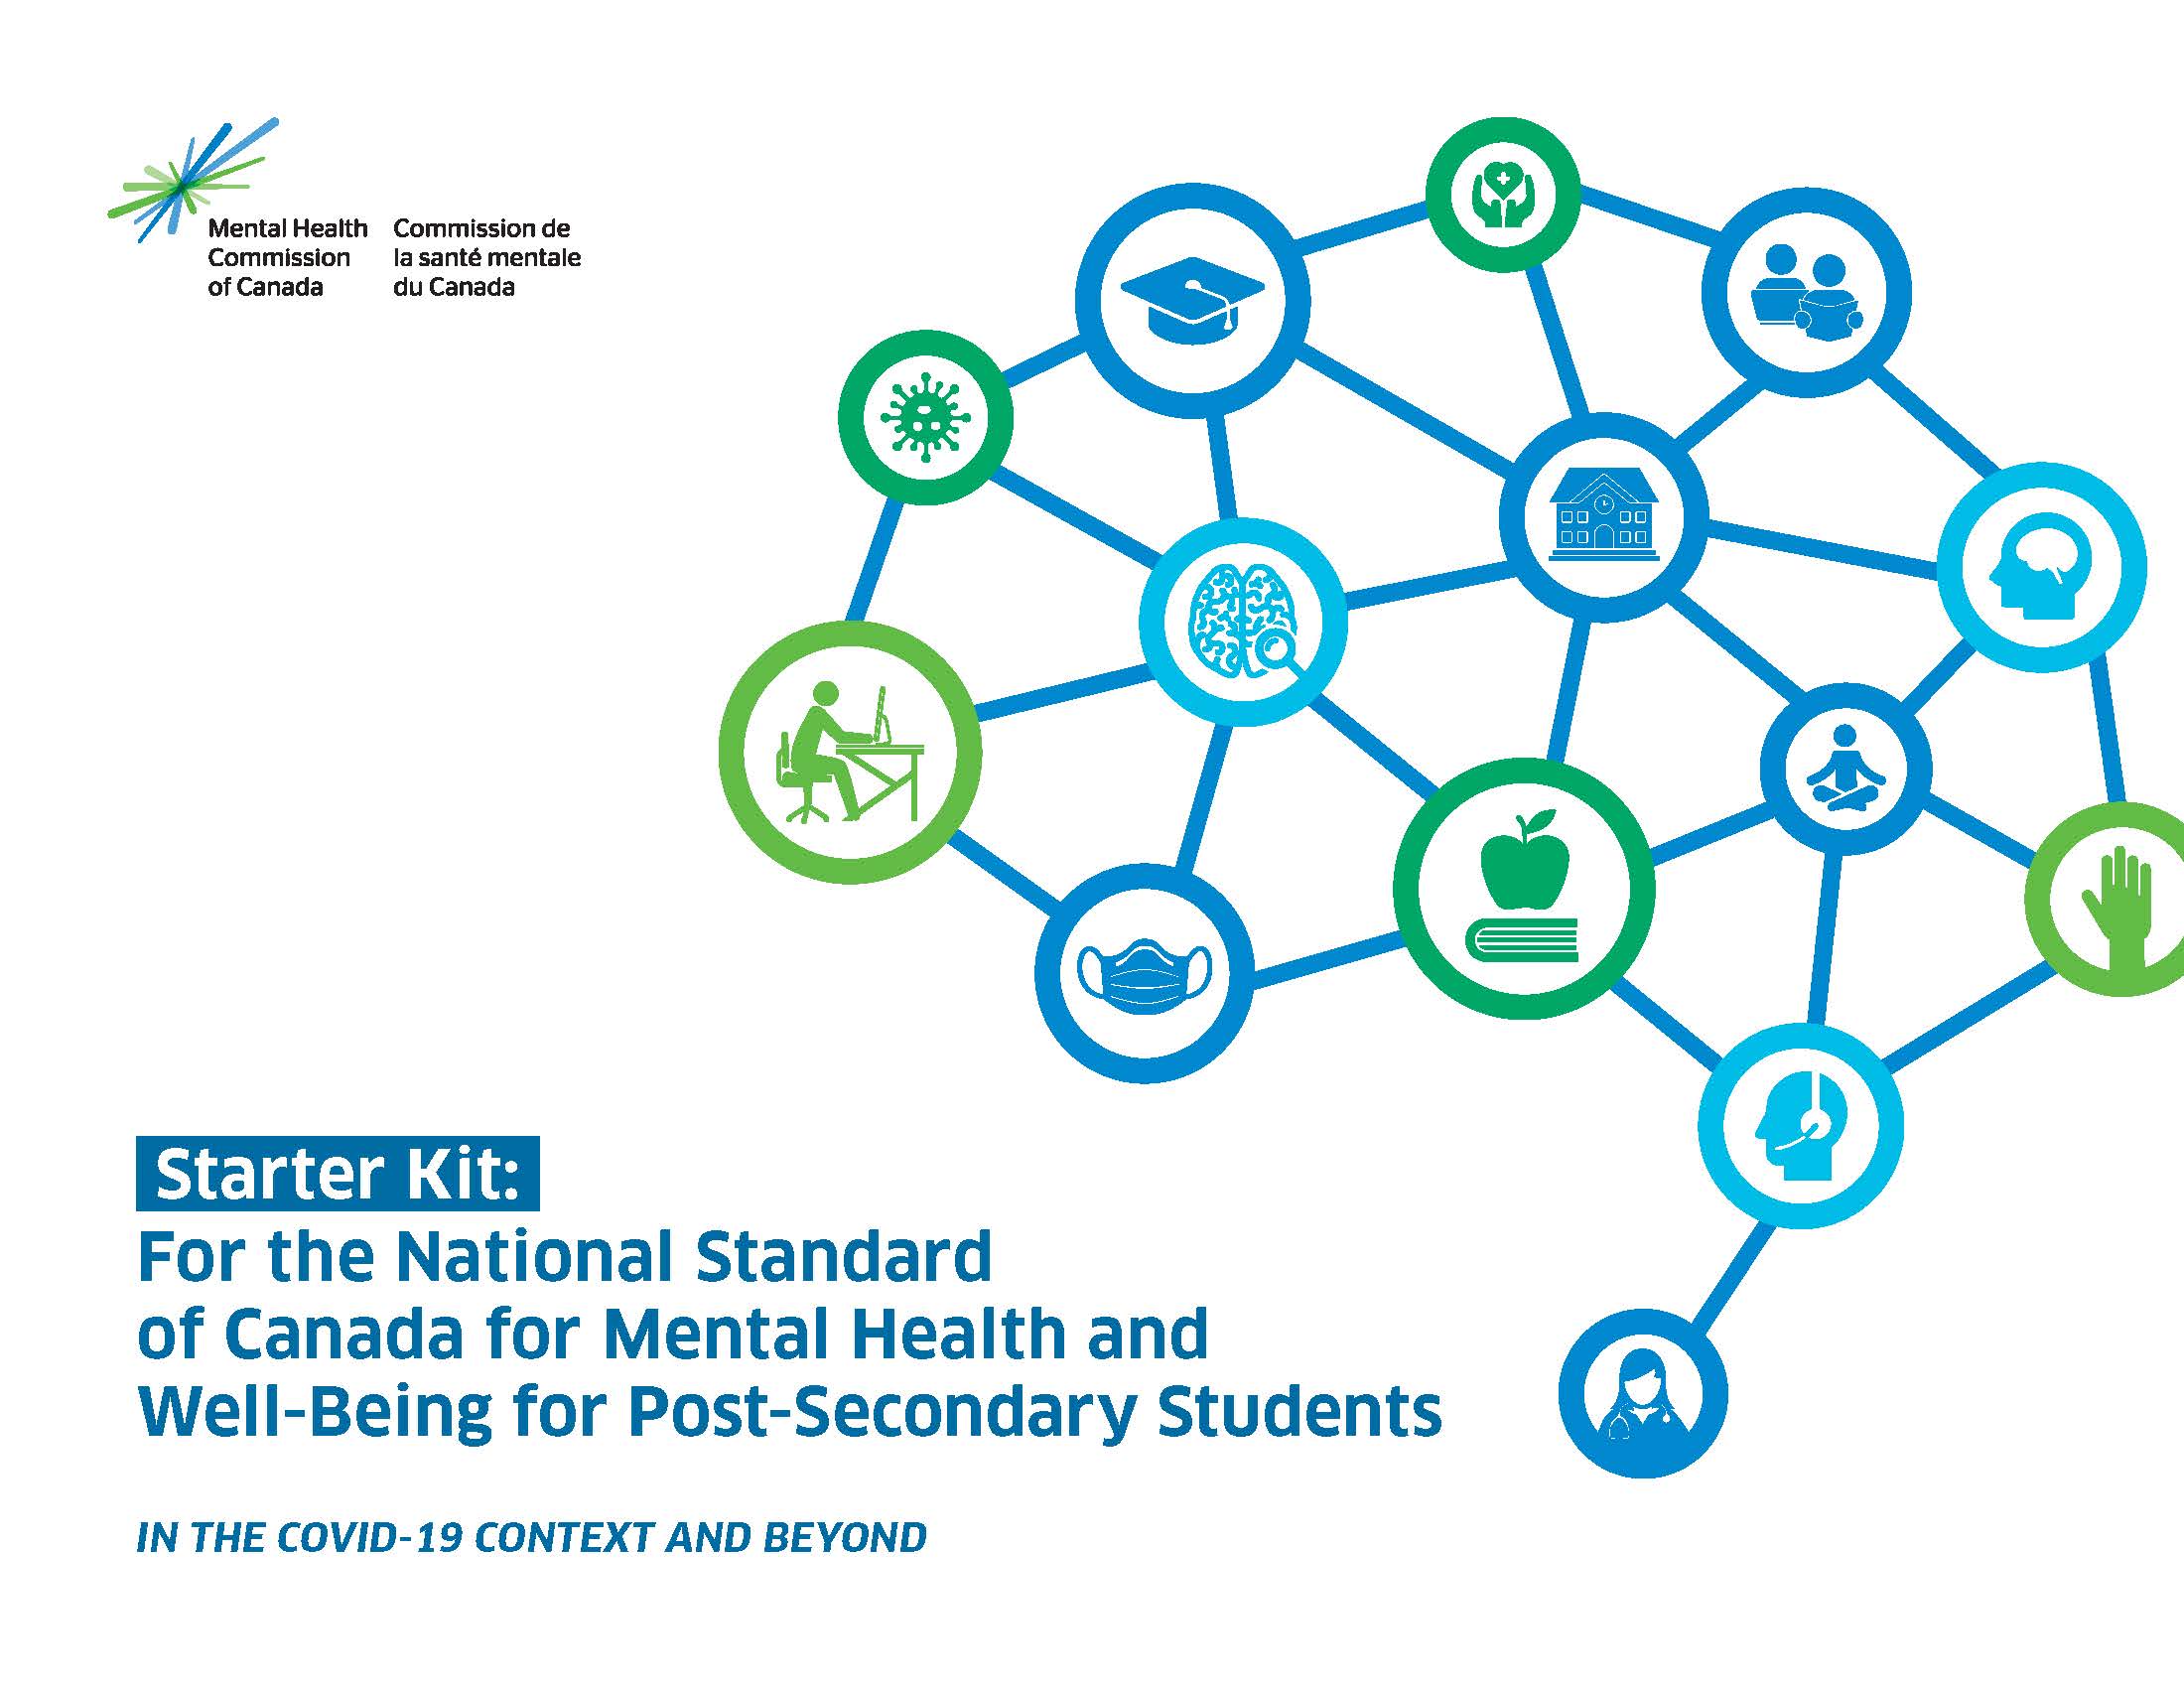 Cover image for the Starter Kit: For the National Standard of Canada for Mental Health and Well-Being for Post-Secondary Students IN THE COVID-19 CONTEXT AND BEYOND. The graphic shows a collection of icons organized to look like a brain.